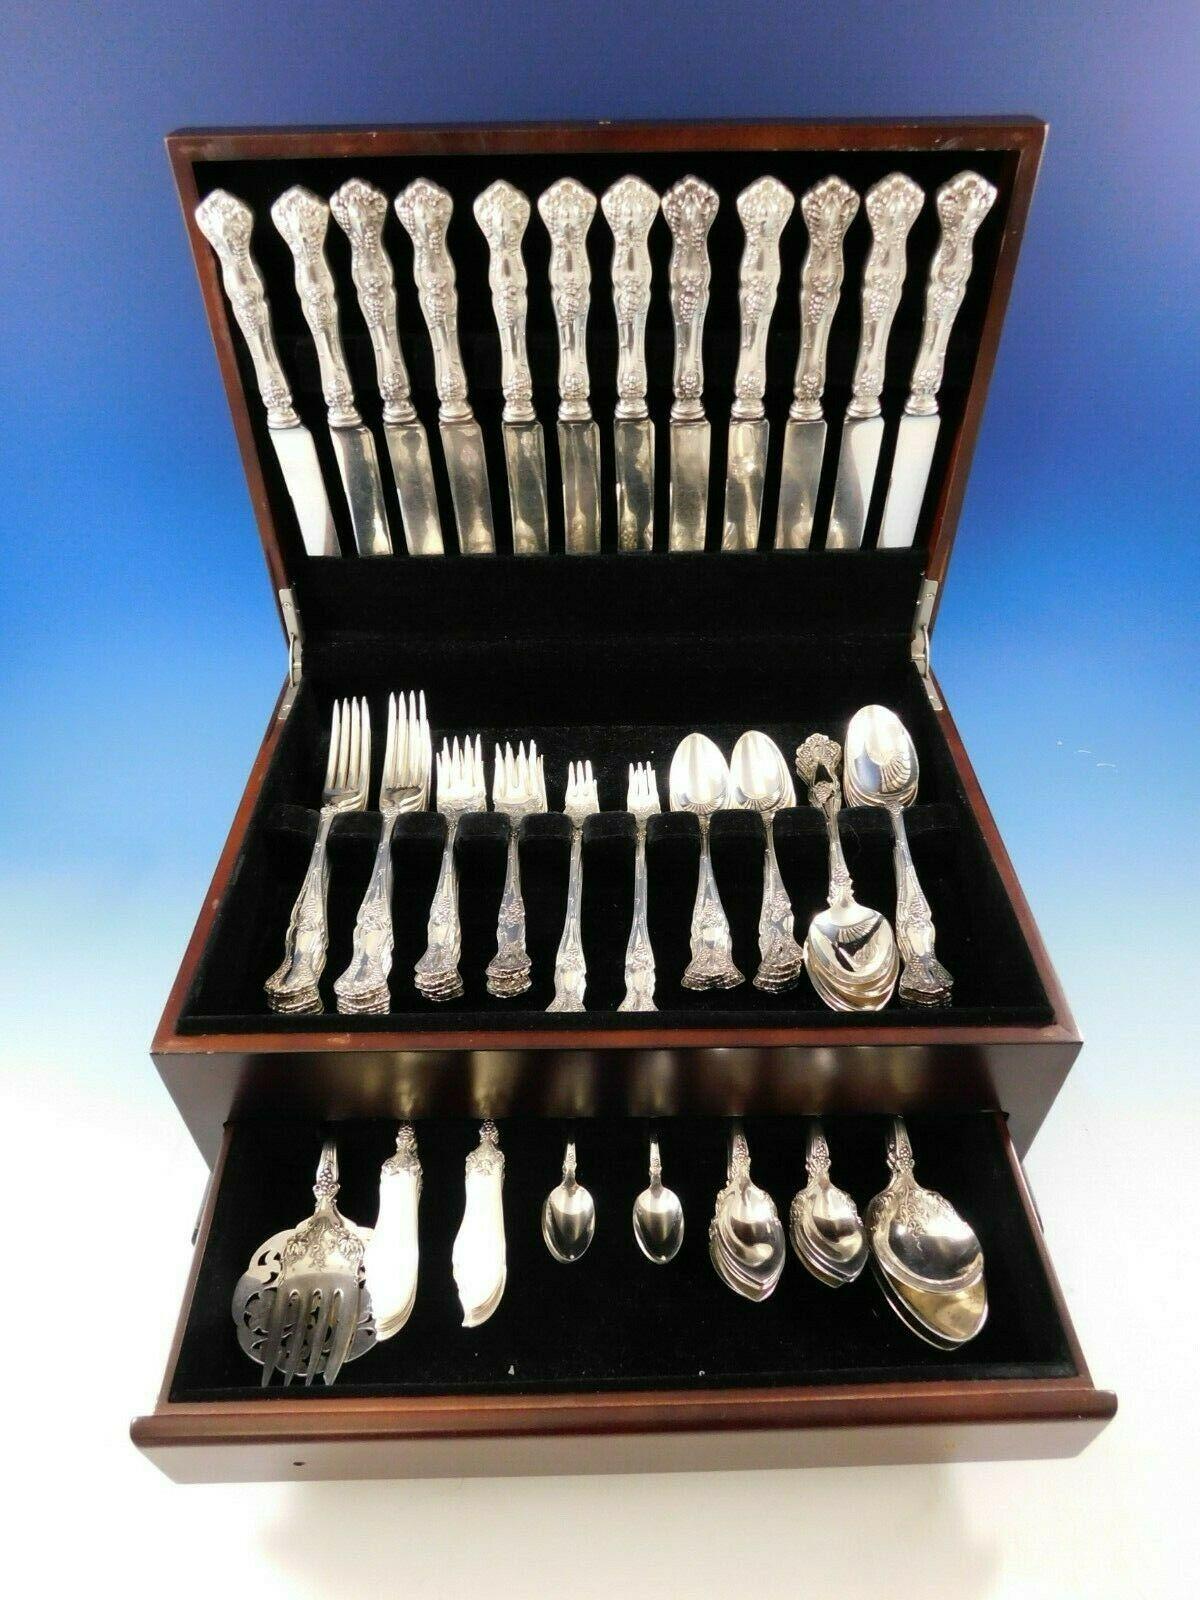 Vintage by 1847 Rogers silverplate flatware set, 81 pieces. This desirable pattern features a beautiful grape motif. This set includes:

12 dinner knives, 9 3/4